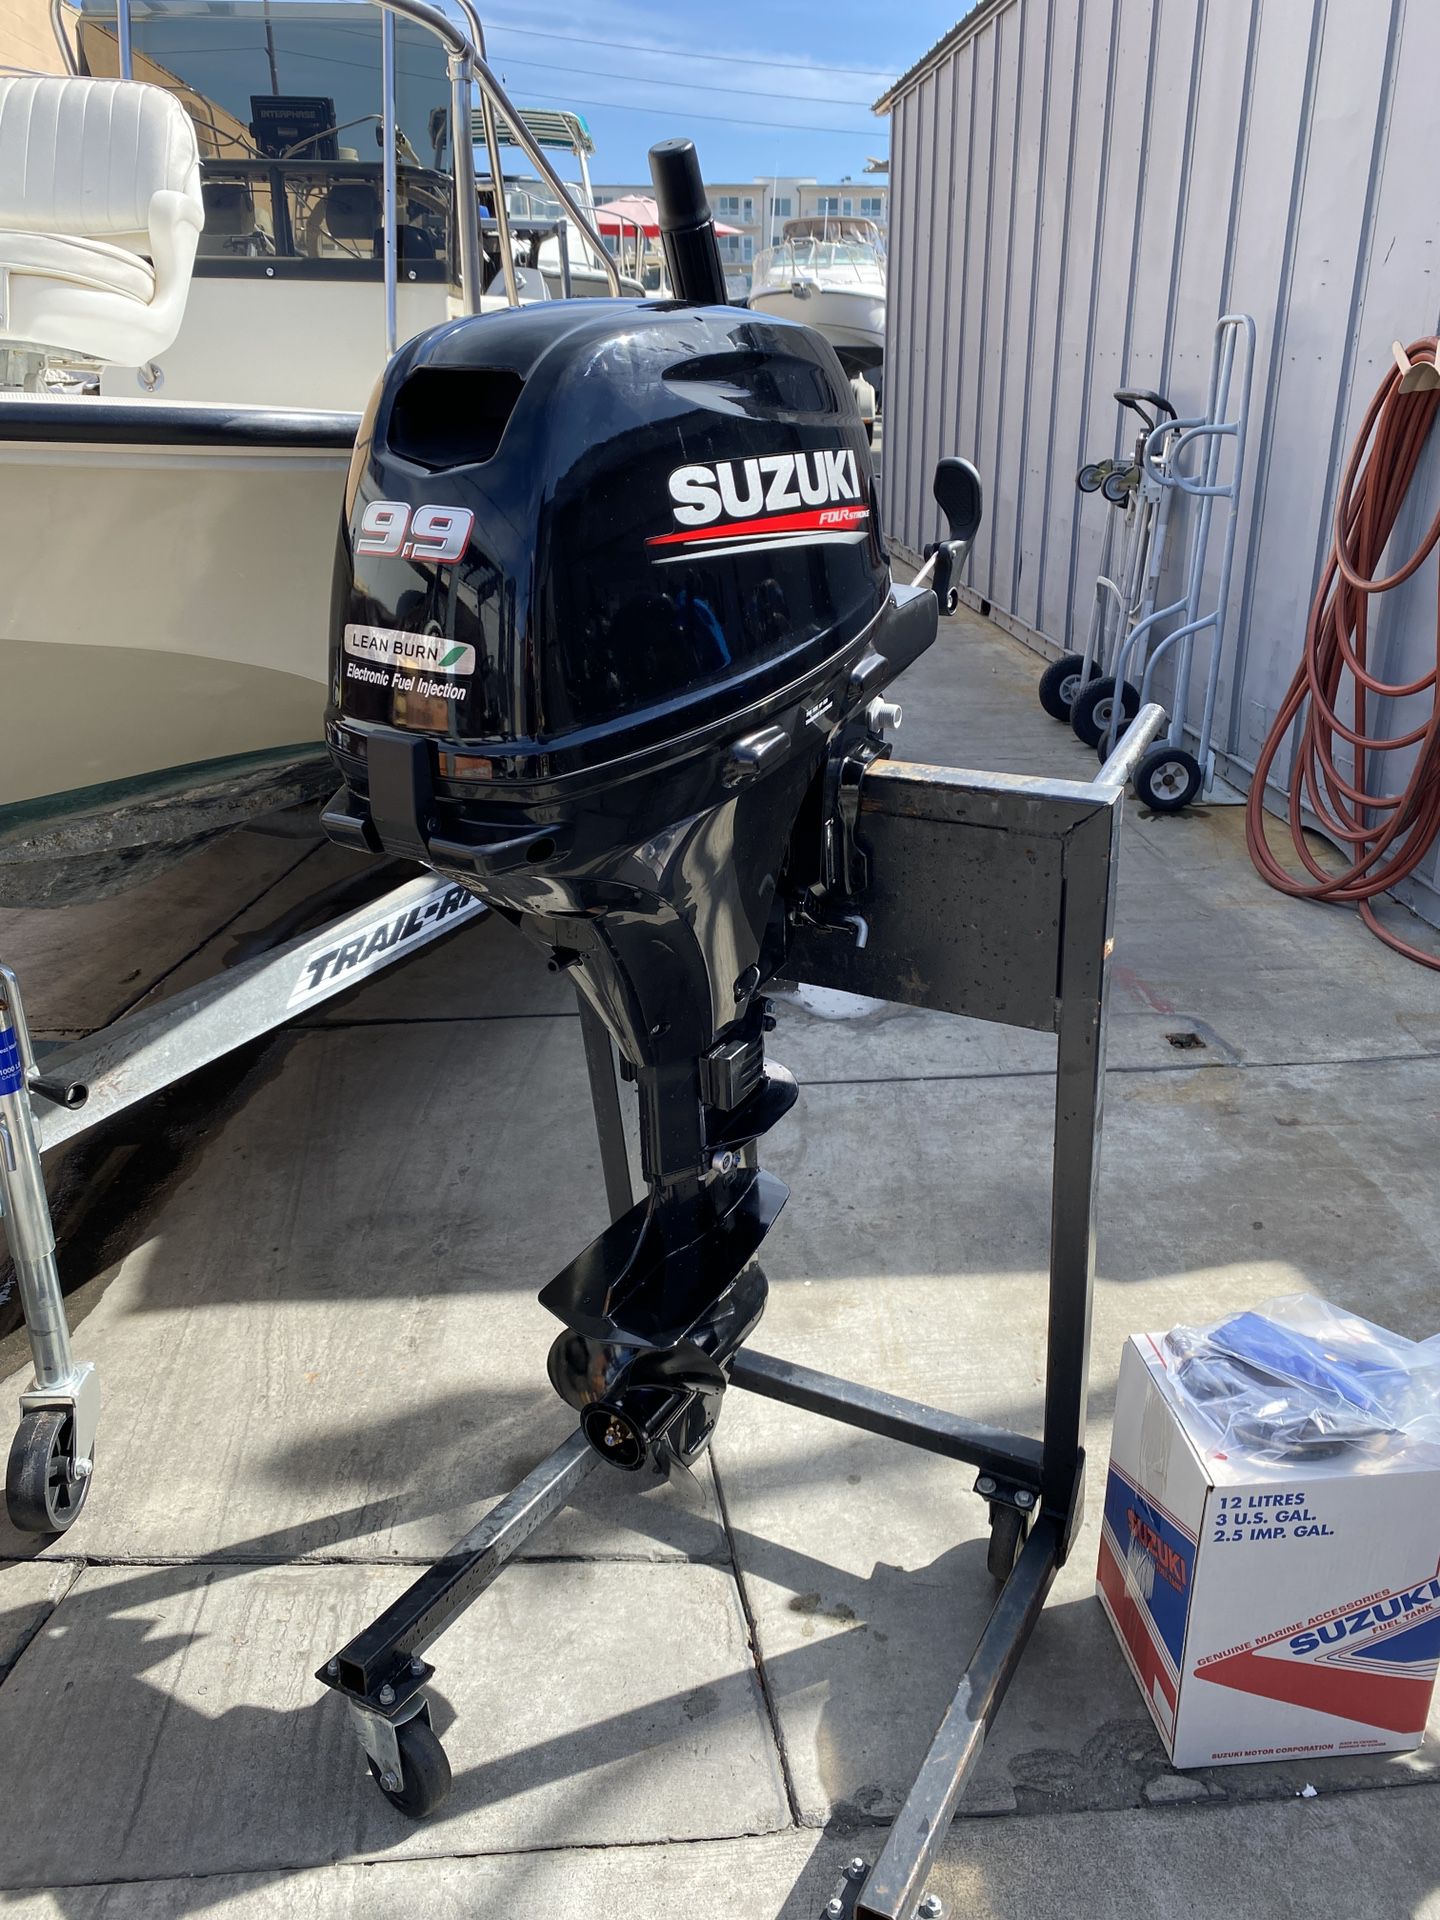 Photo Suzuki 9.9 HP Outboard boat Not Included